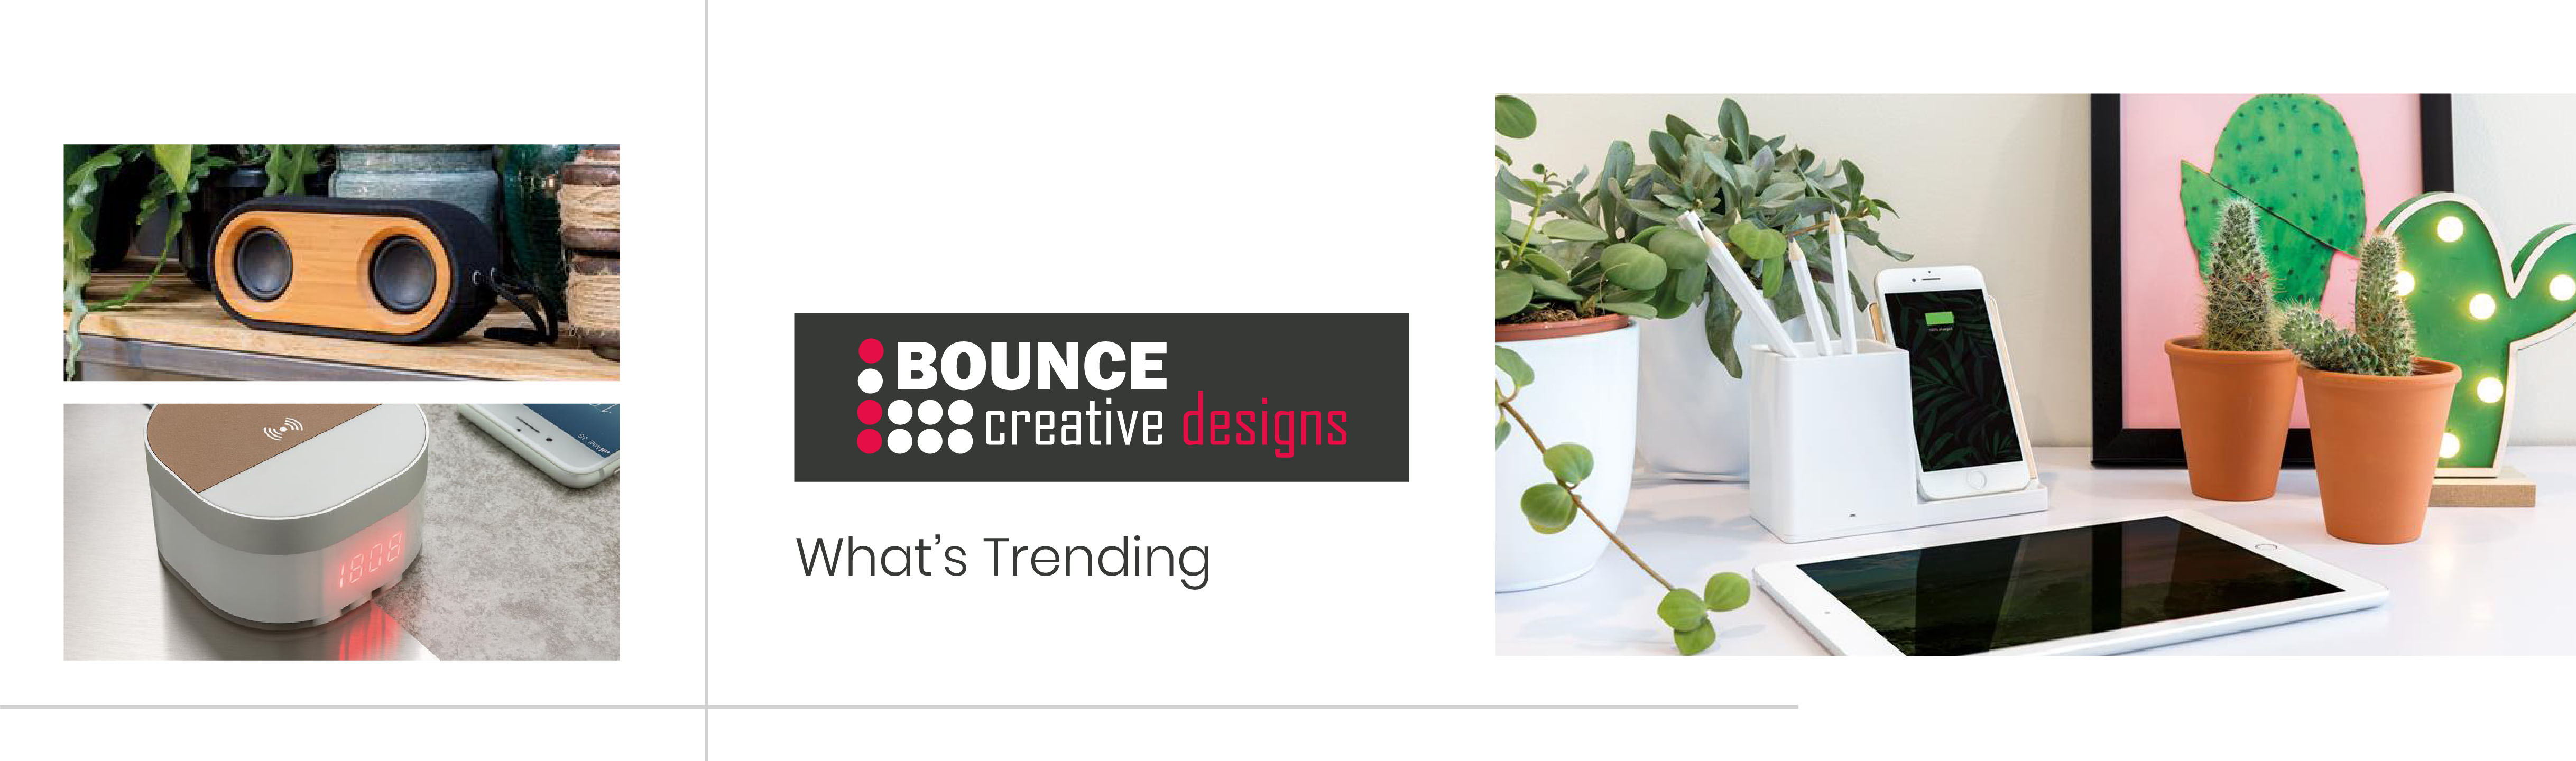 PromoBrand_Trending_promotiona_Products_Banner_Bounce_Creative_Designs